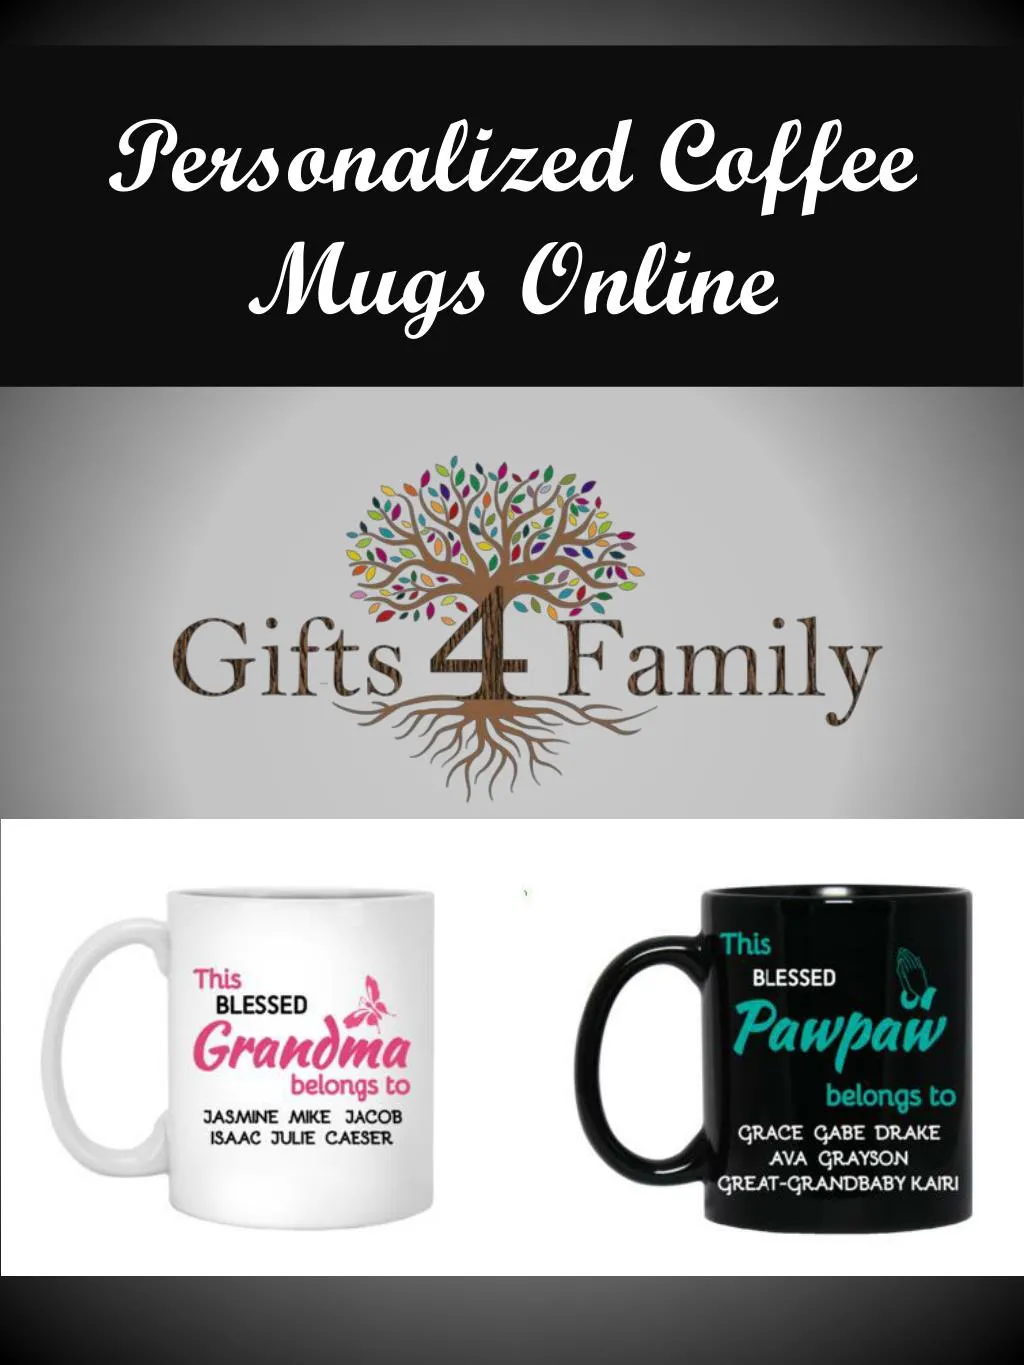 personalized coffee mugs online